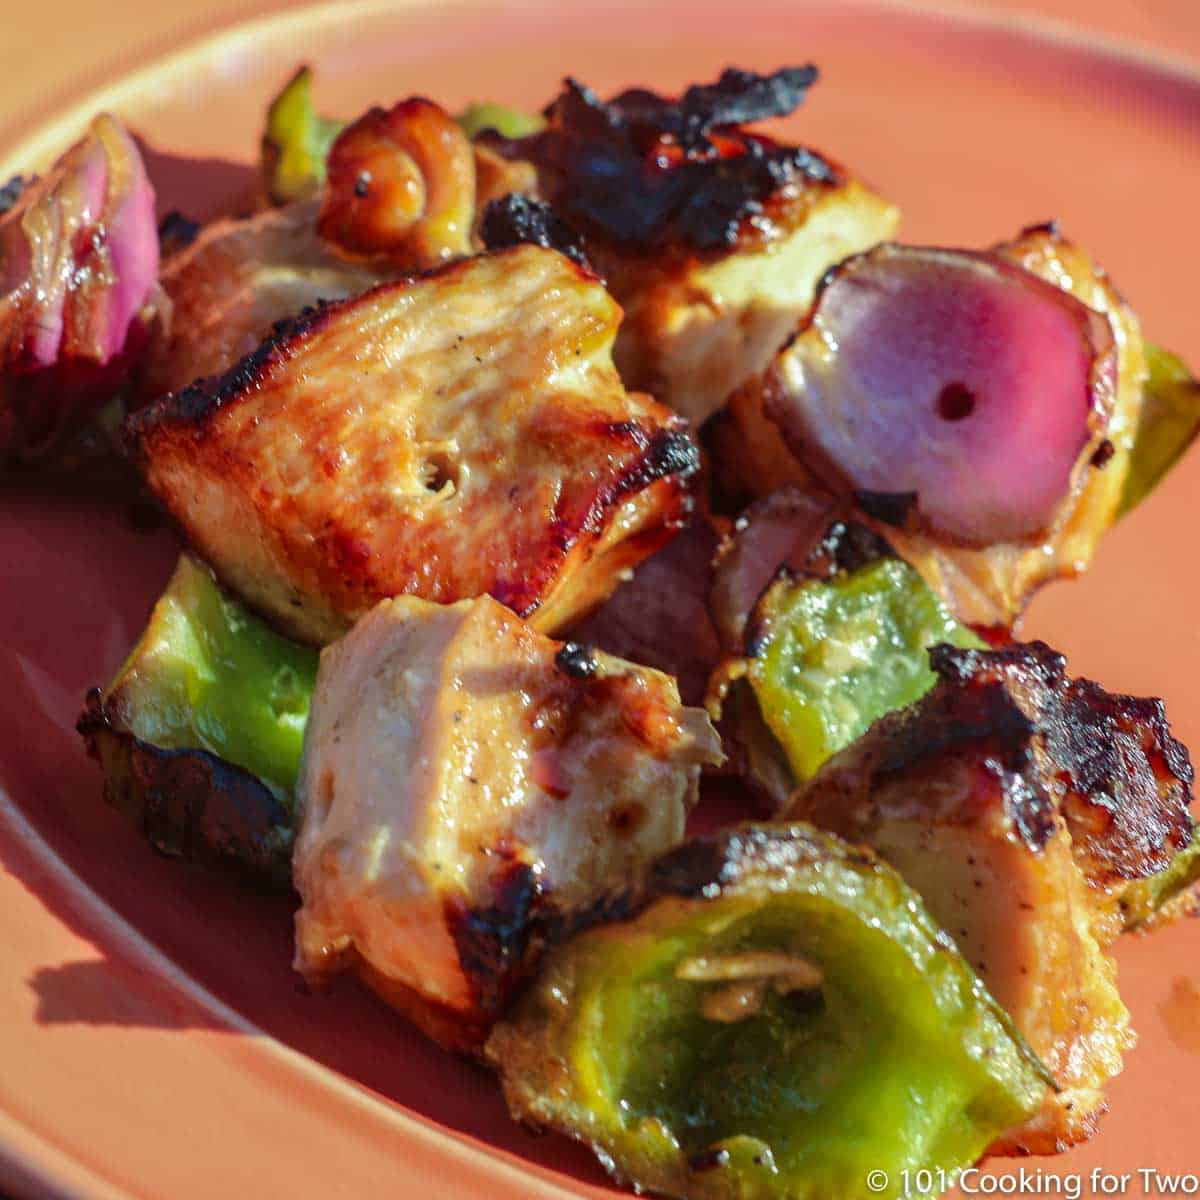 grilled chicken chunks with veggies on orange plate